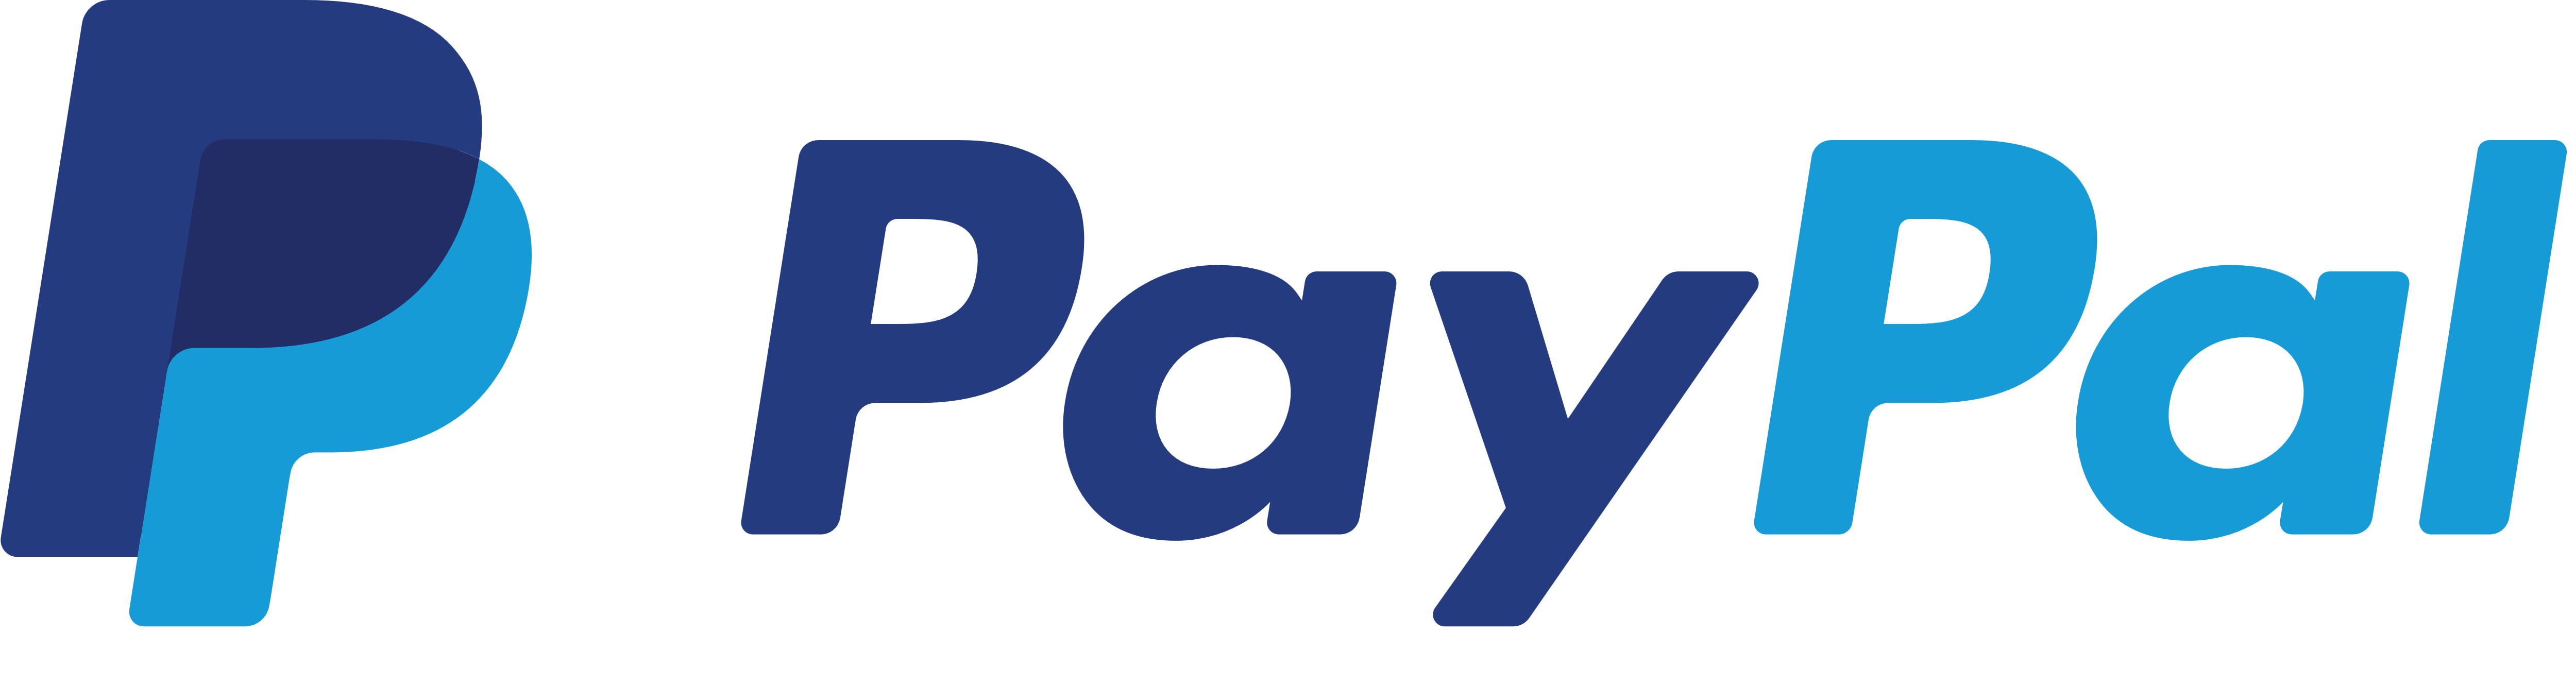 We accept PayPal Payments